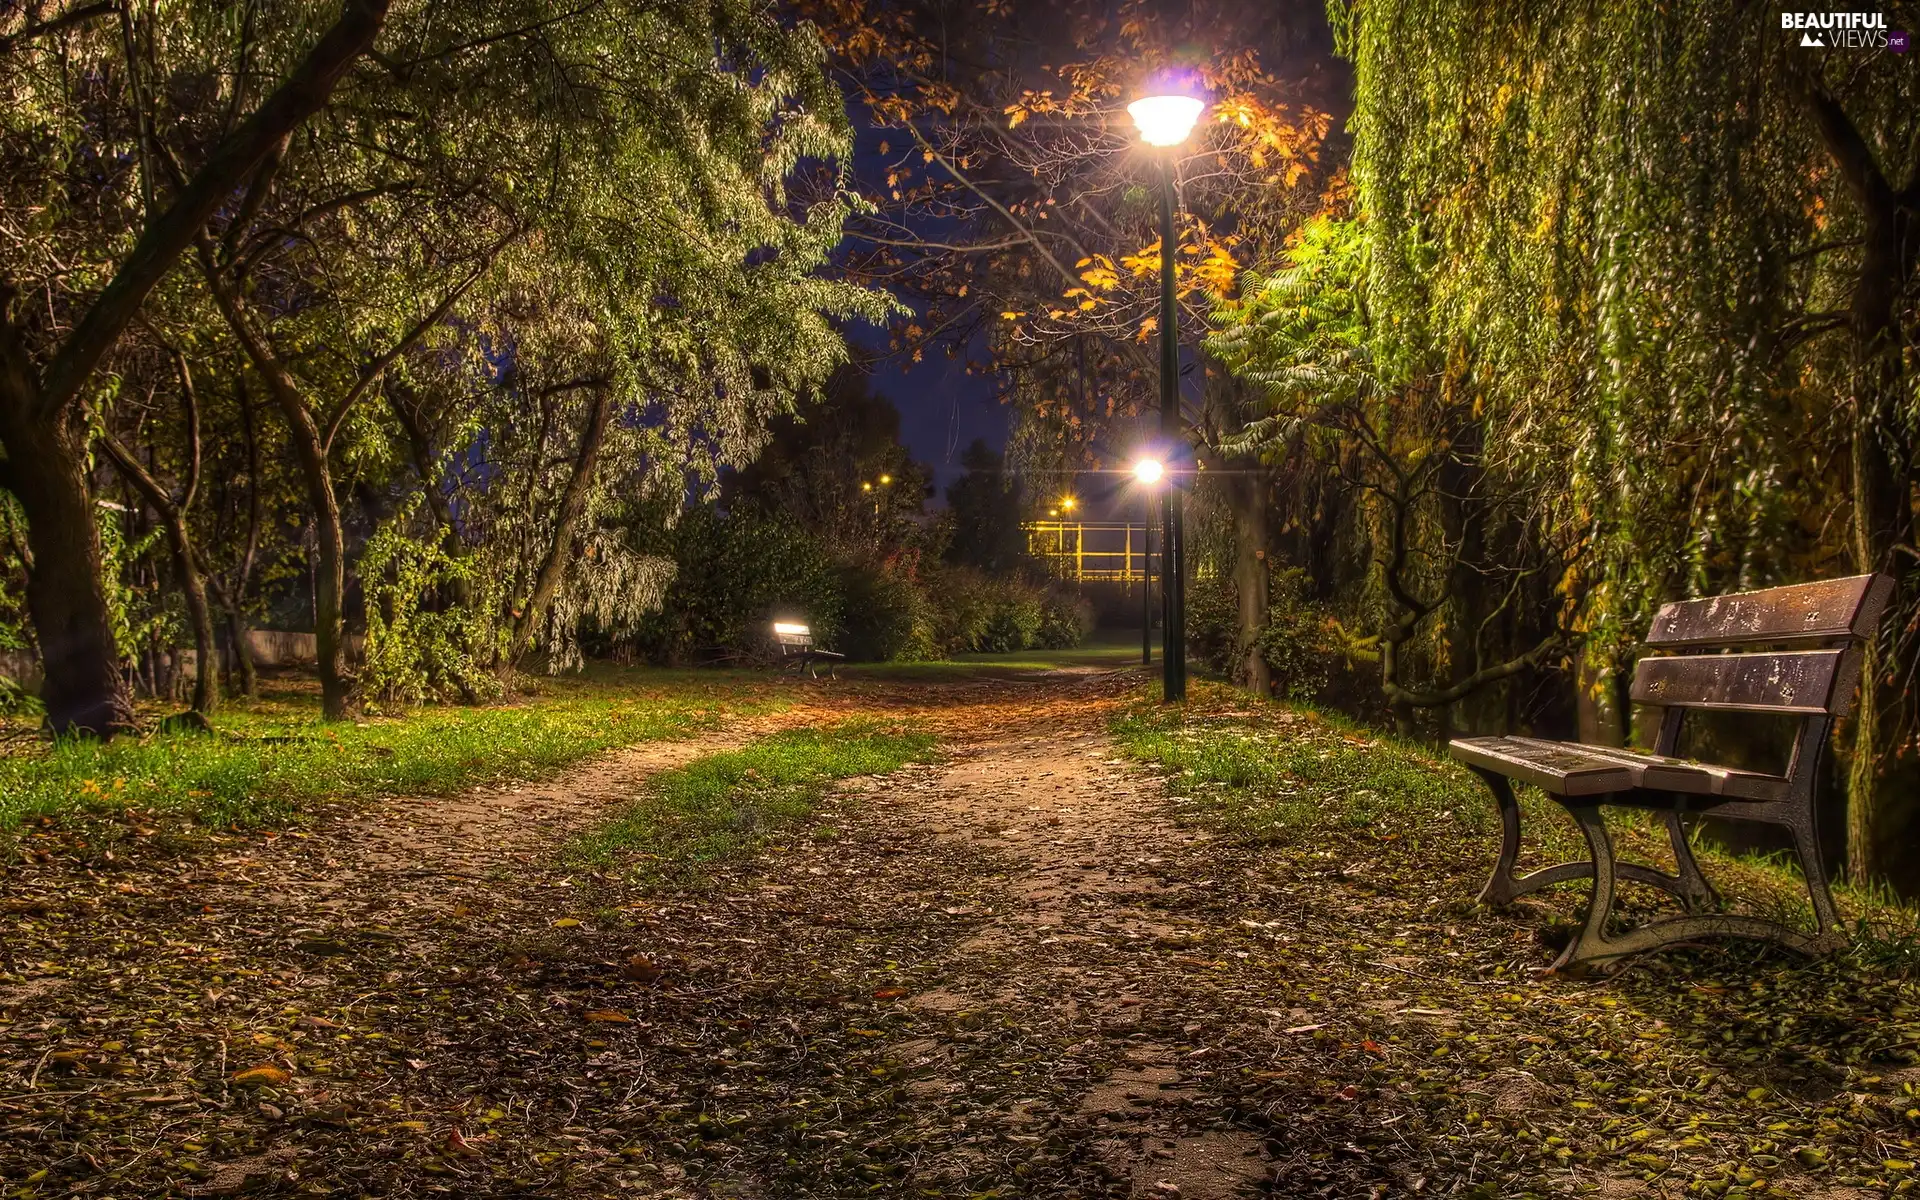 Bench, Park, viewes, Lamps, trees, evening